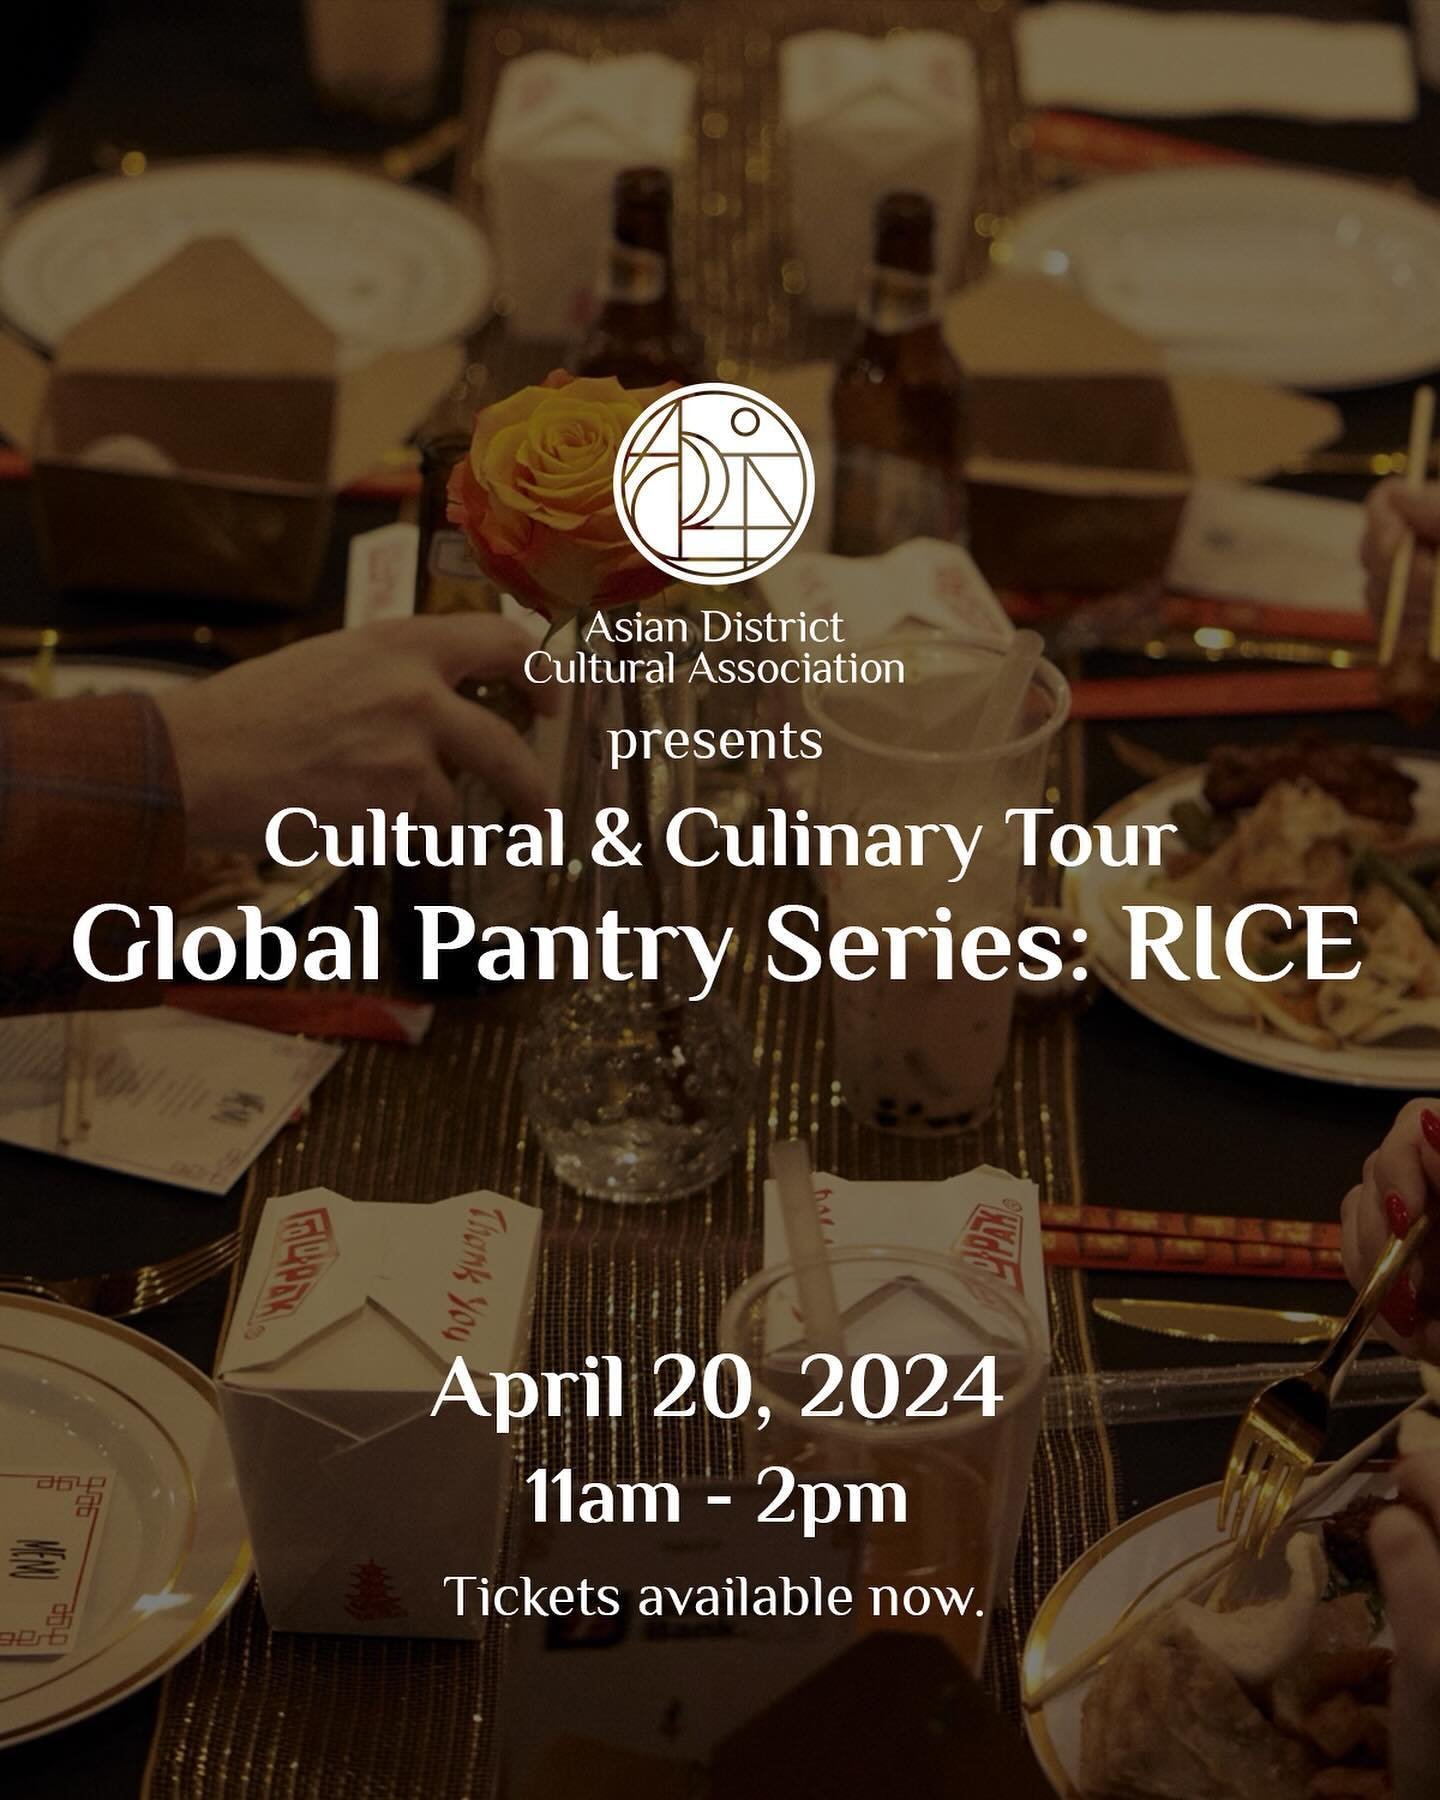 3 DAYS AWAY! Join us as we explore the versatility of rice and how different cultures across Asia incorporate this one ingredient in their traditional dishes.🍚

🍙Experience a hands-on learning activity from the  @japansocietyok 

🥢Try dishes from 